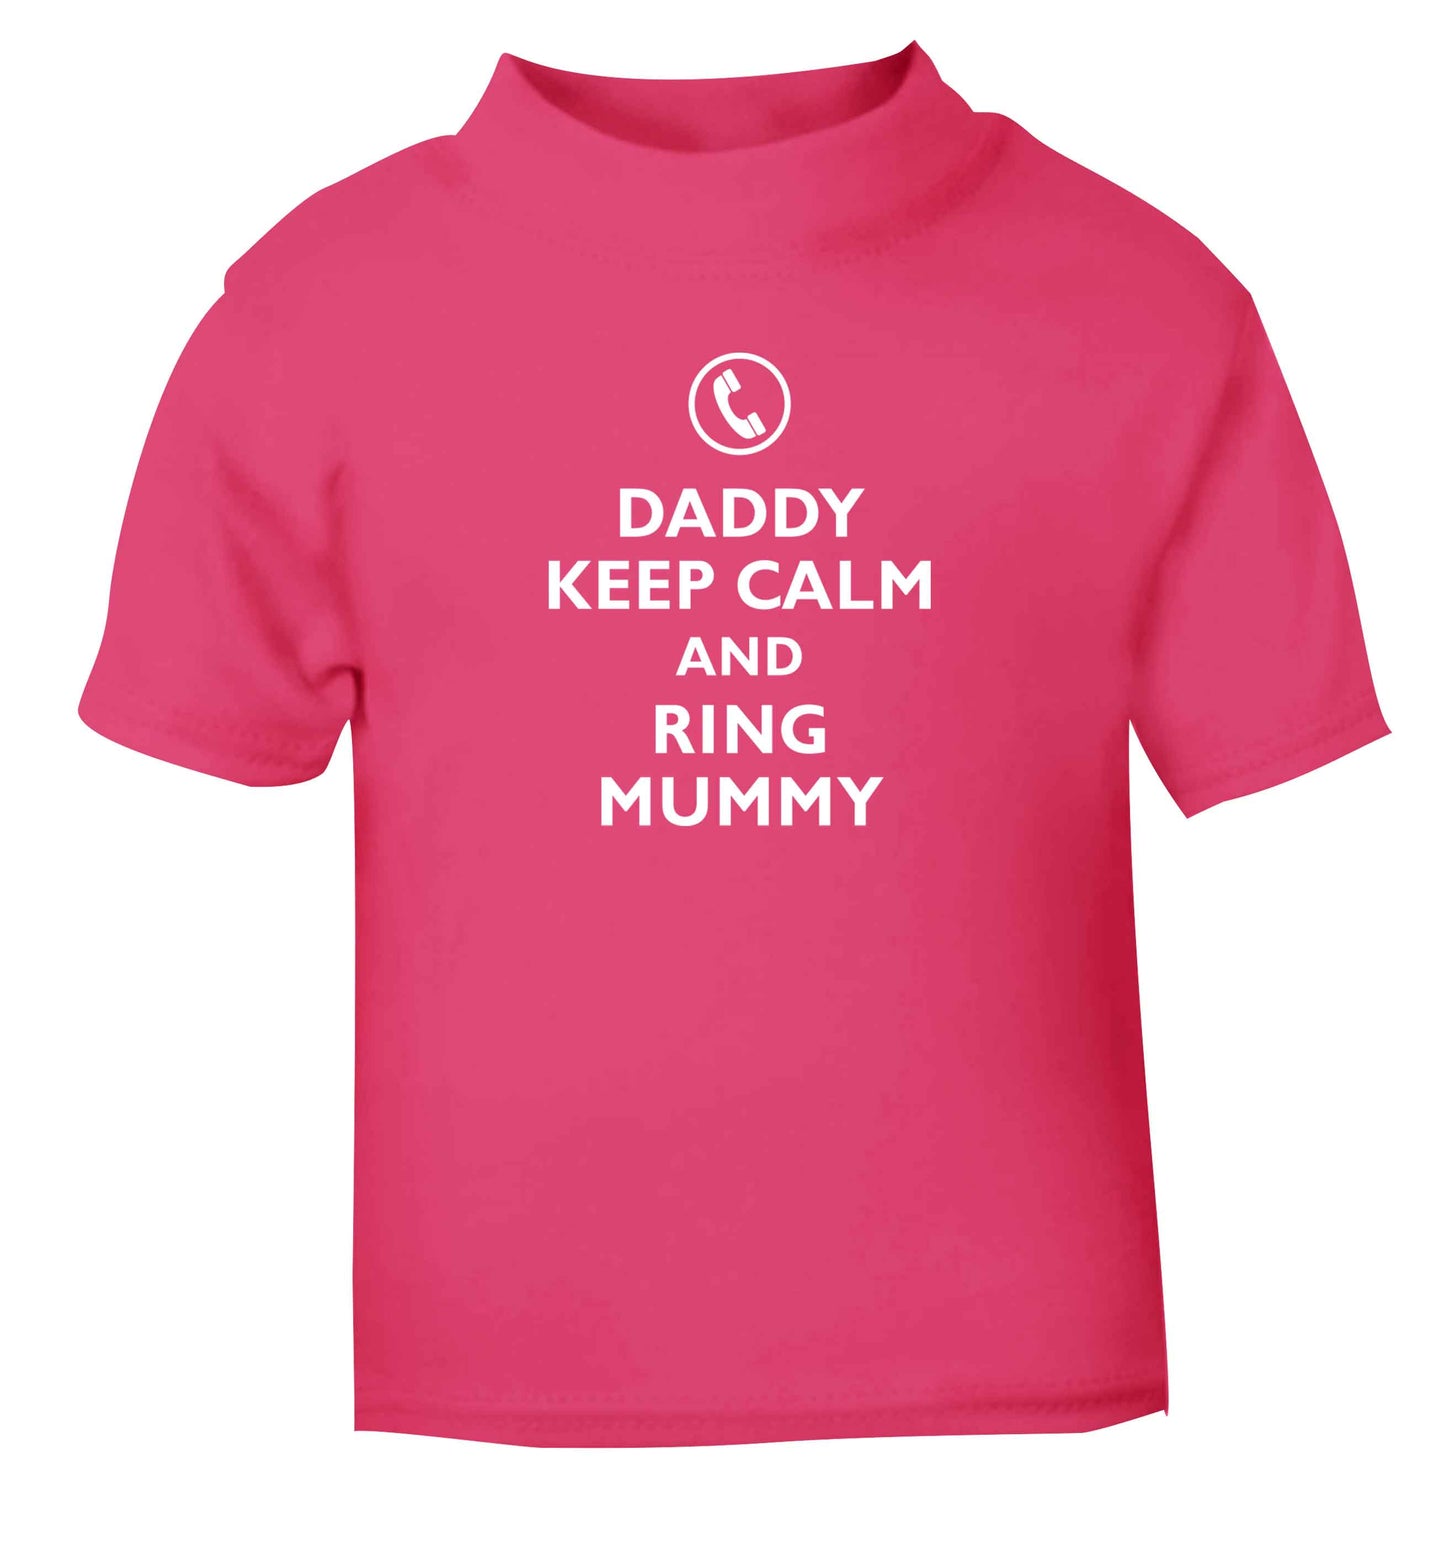 Daddy keep calm and ring mummy pink baby toddler Tshirt 2 Years